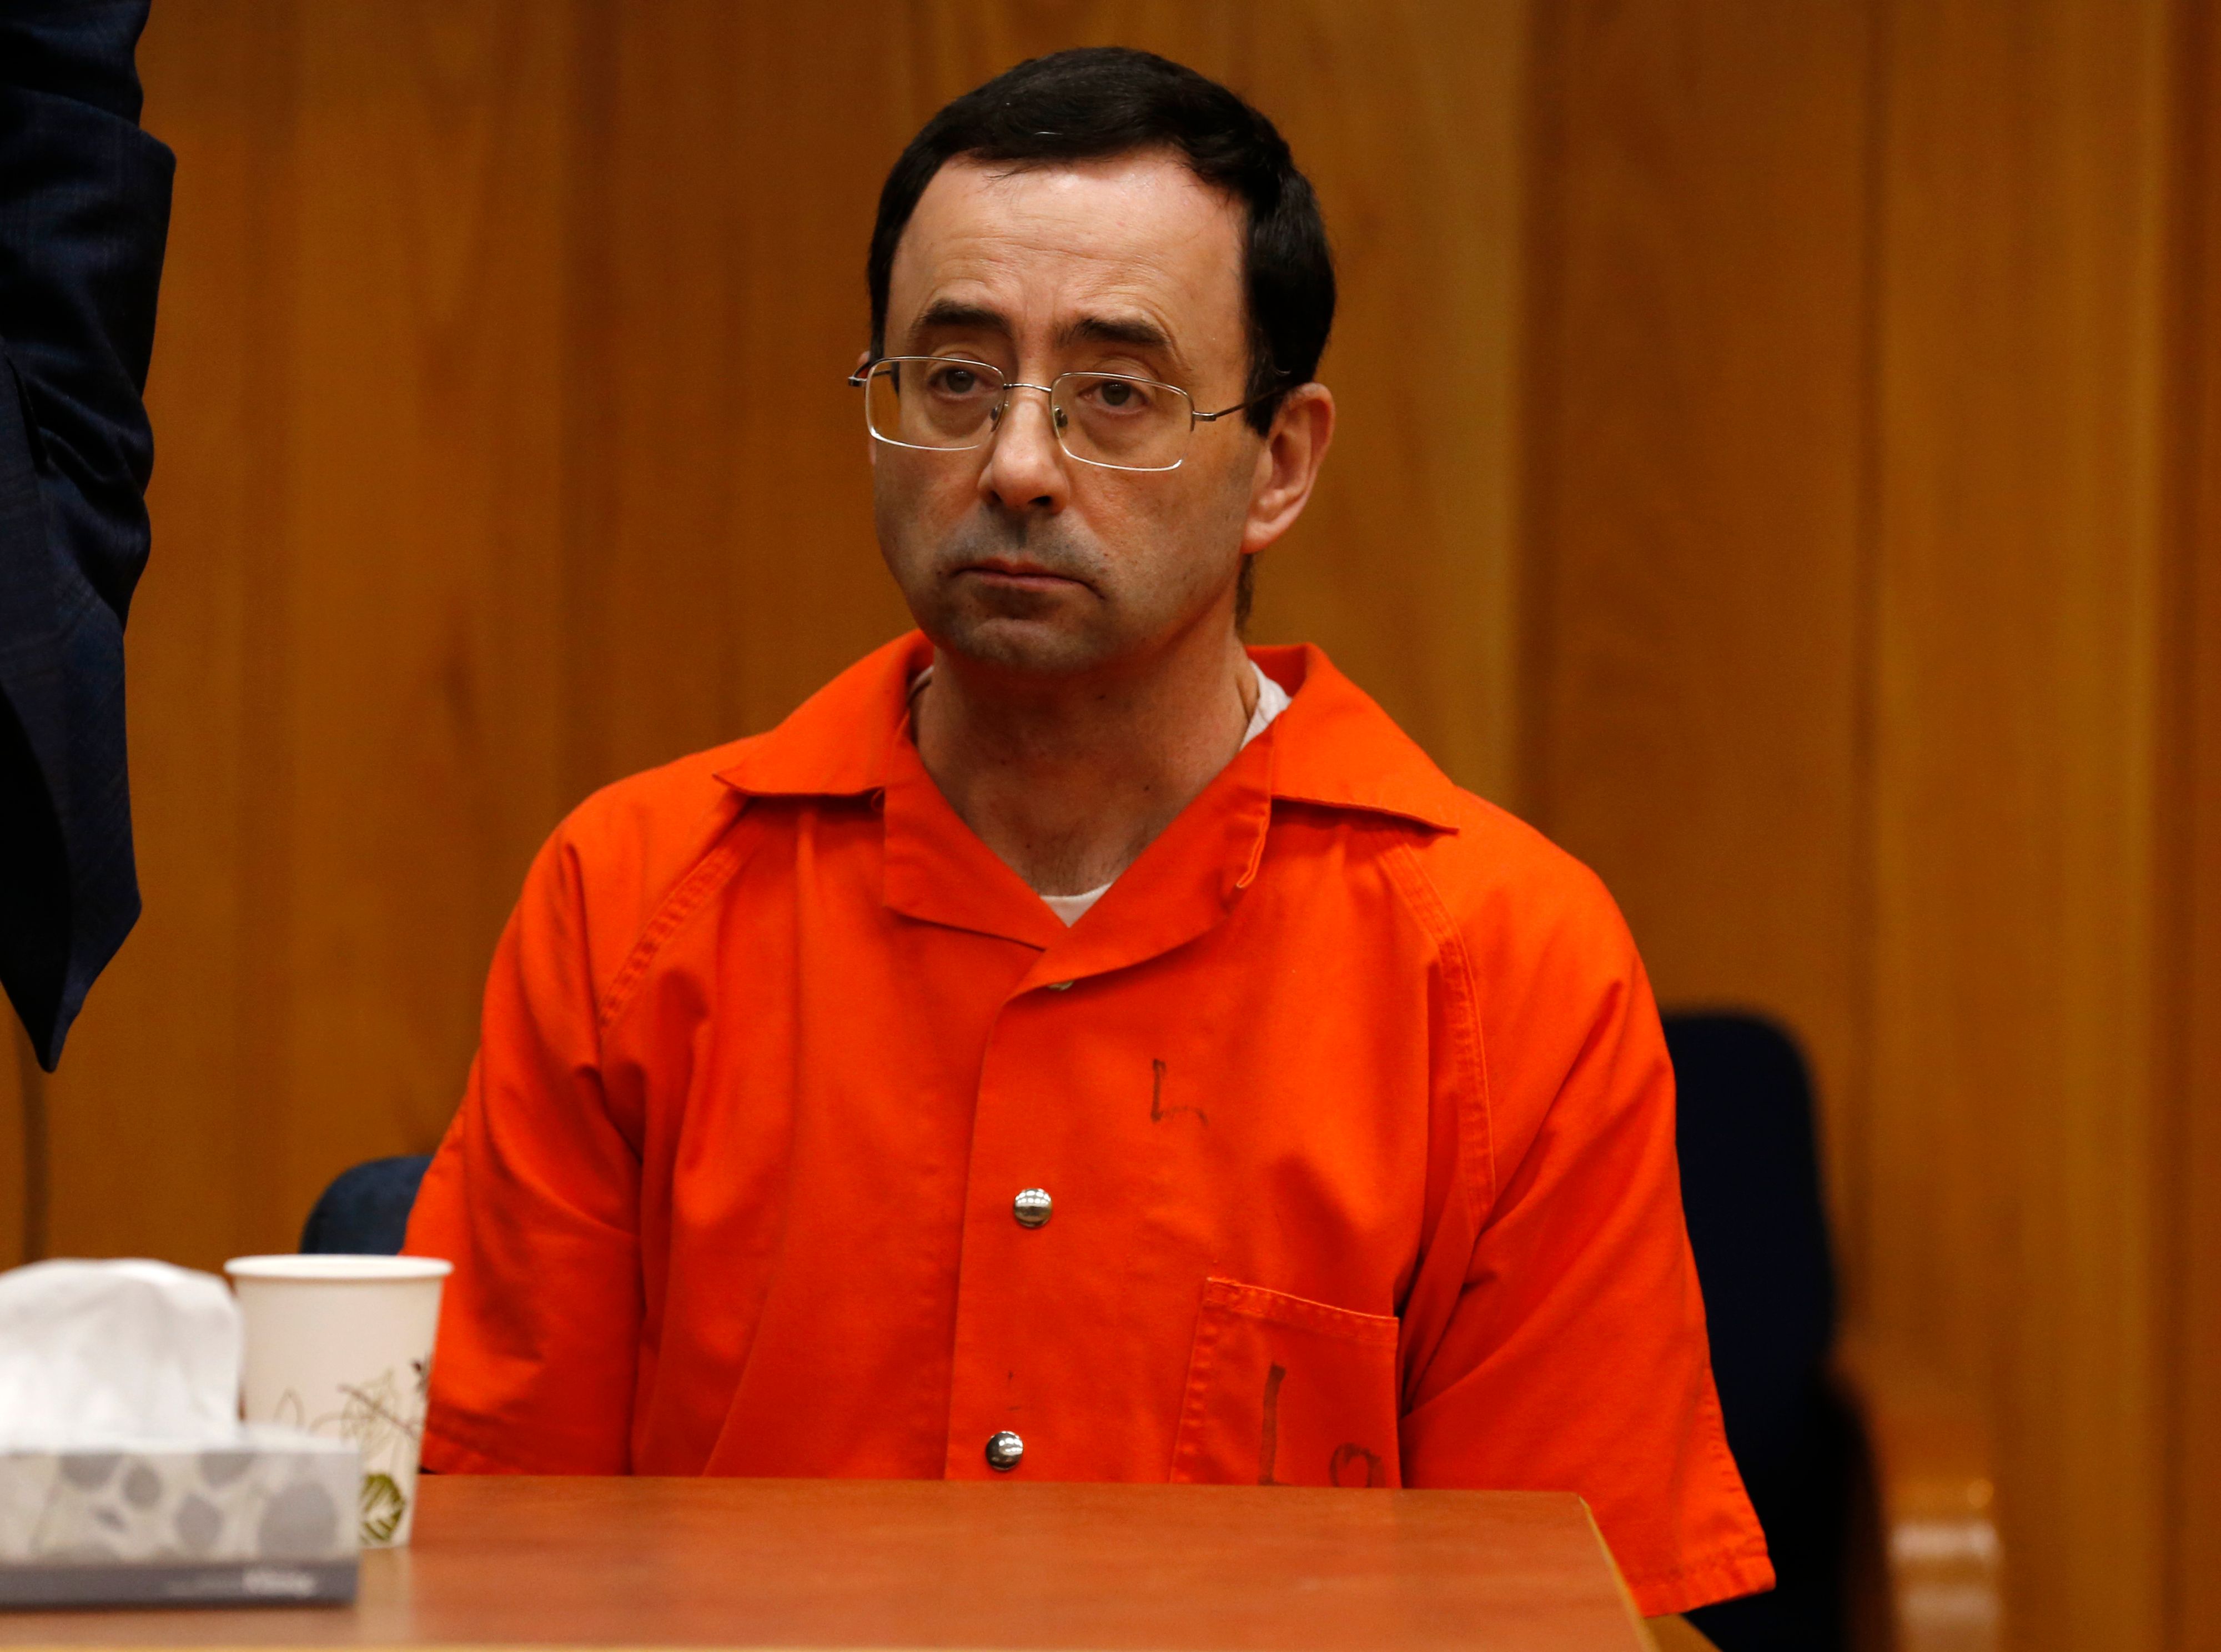 Former Michigan State University and USA Gymnastics doctor Larry Nassar listens during the sentencing phase in Eaton, County Circuit Court on January 31, 2018 in Charlotte, Michigan. (JEFF KOWALSKY&mdash;AFP/Getty Images)